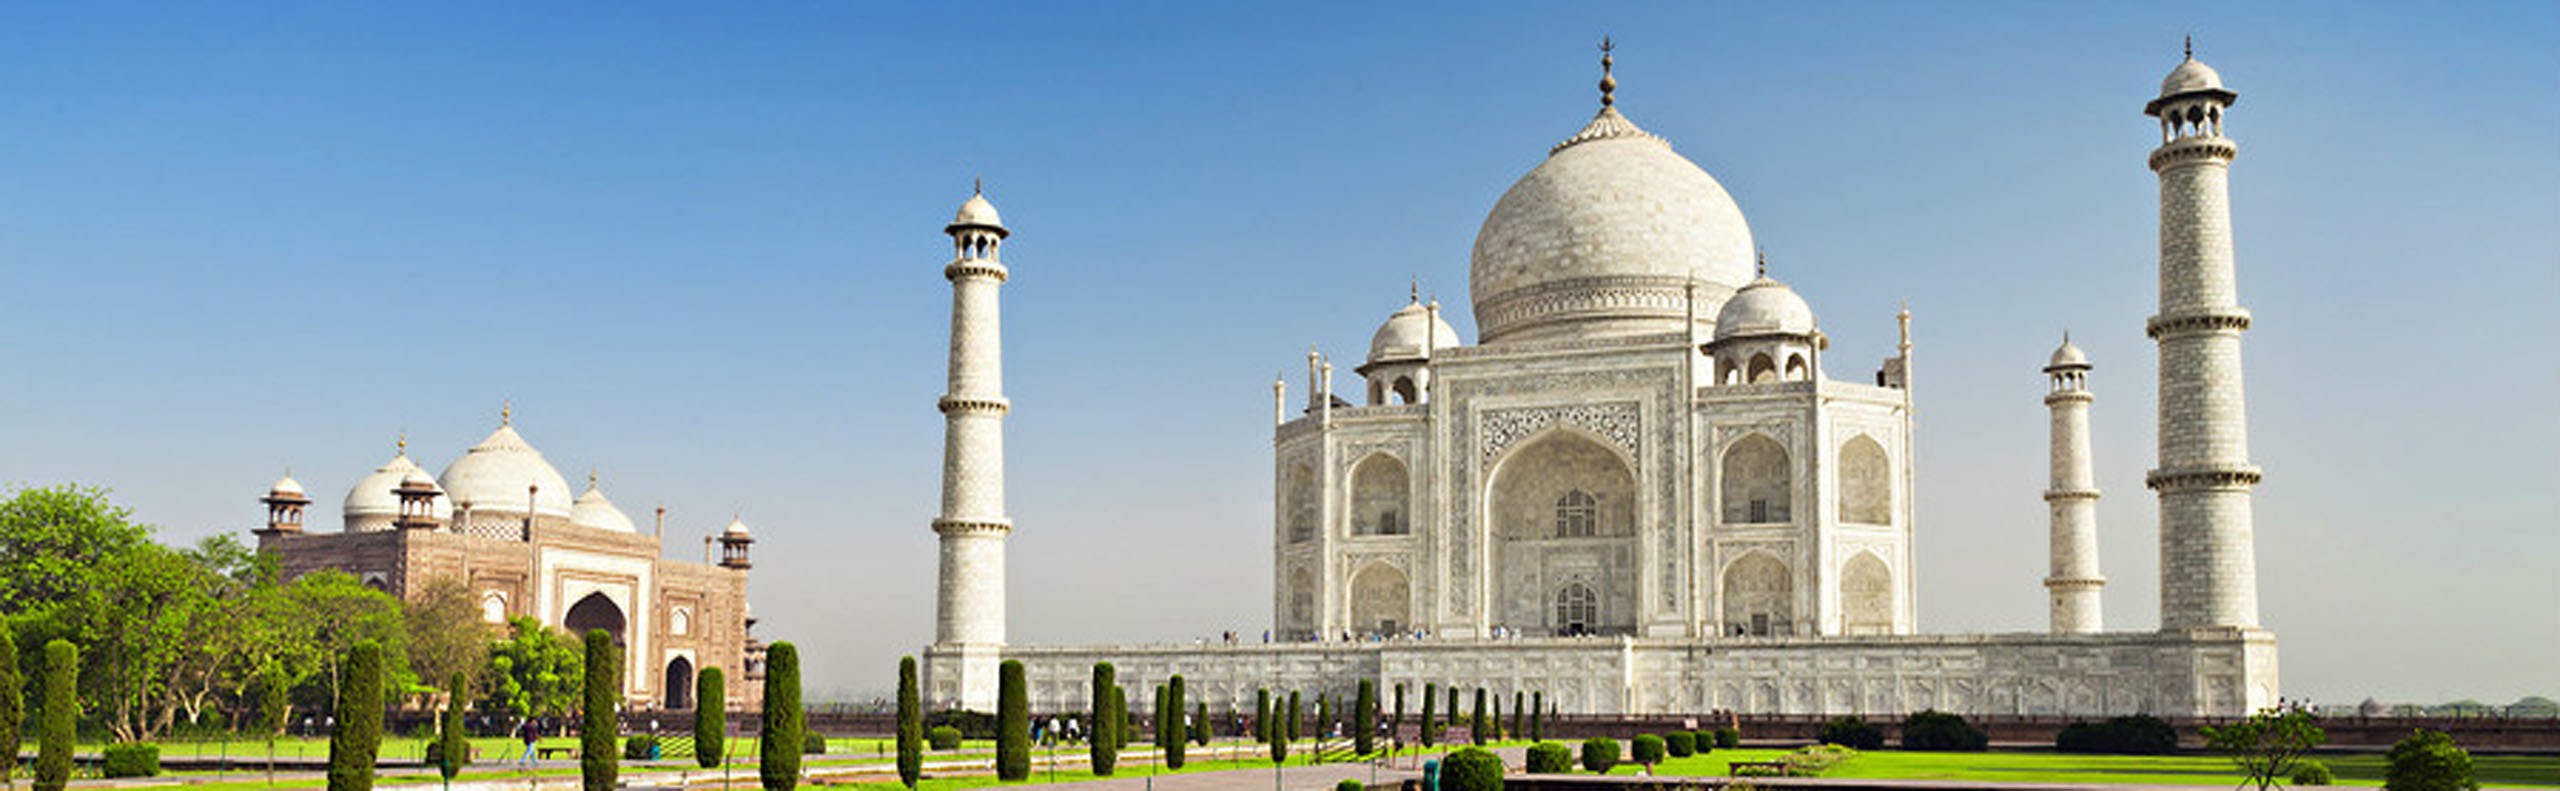 Best Times to Visit the Taj Mahal？Expert Tips in 2022